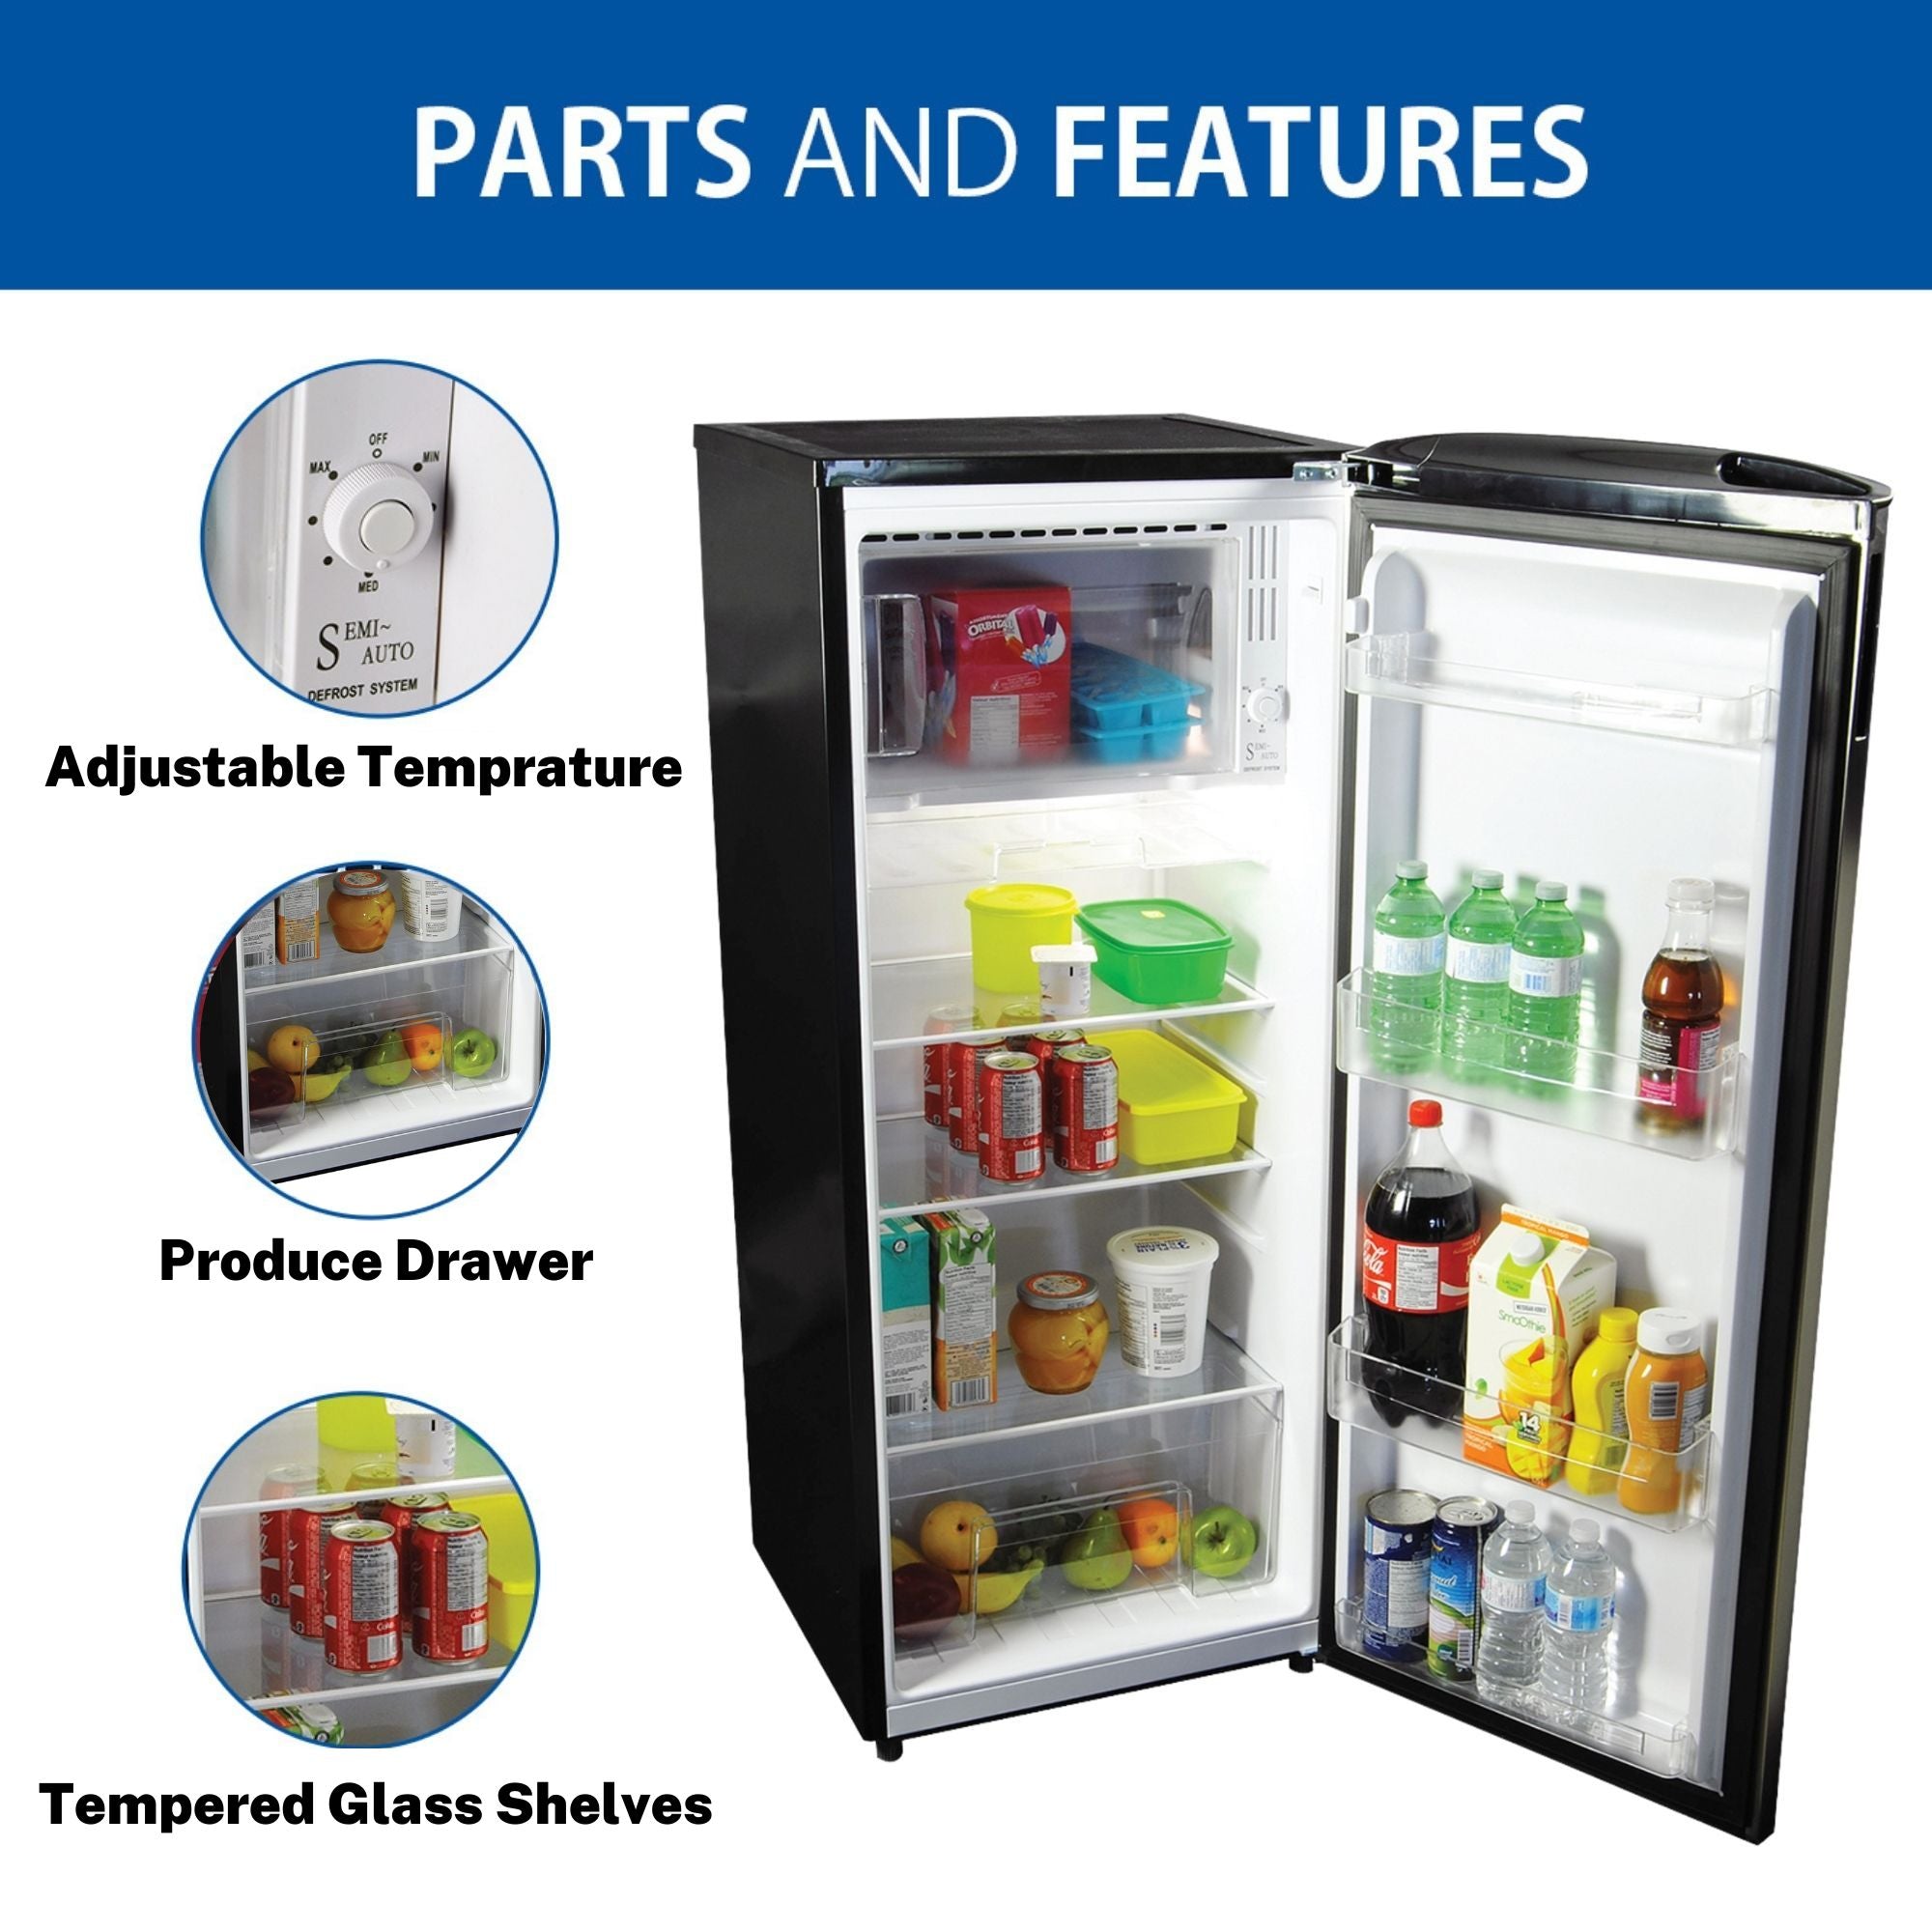 Product shot of compact fridge, open and filled with food, with inset closeup images of parts to the left, labeled: Adjustable temperature; Produce drawer; Tempered glass shelves. Text above reads, "Parts and features"